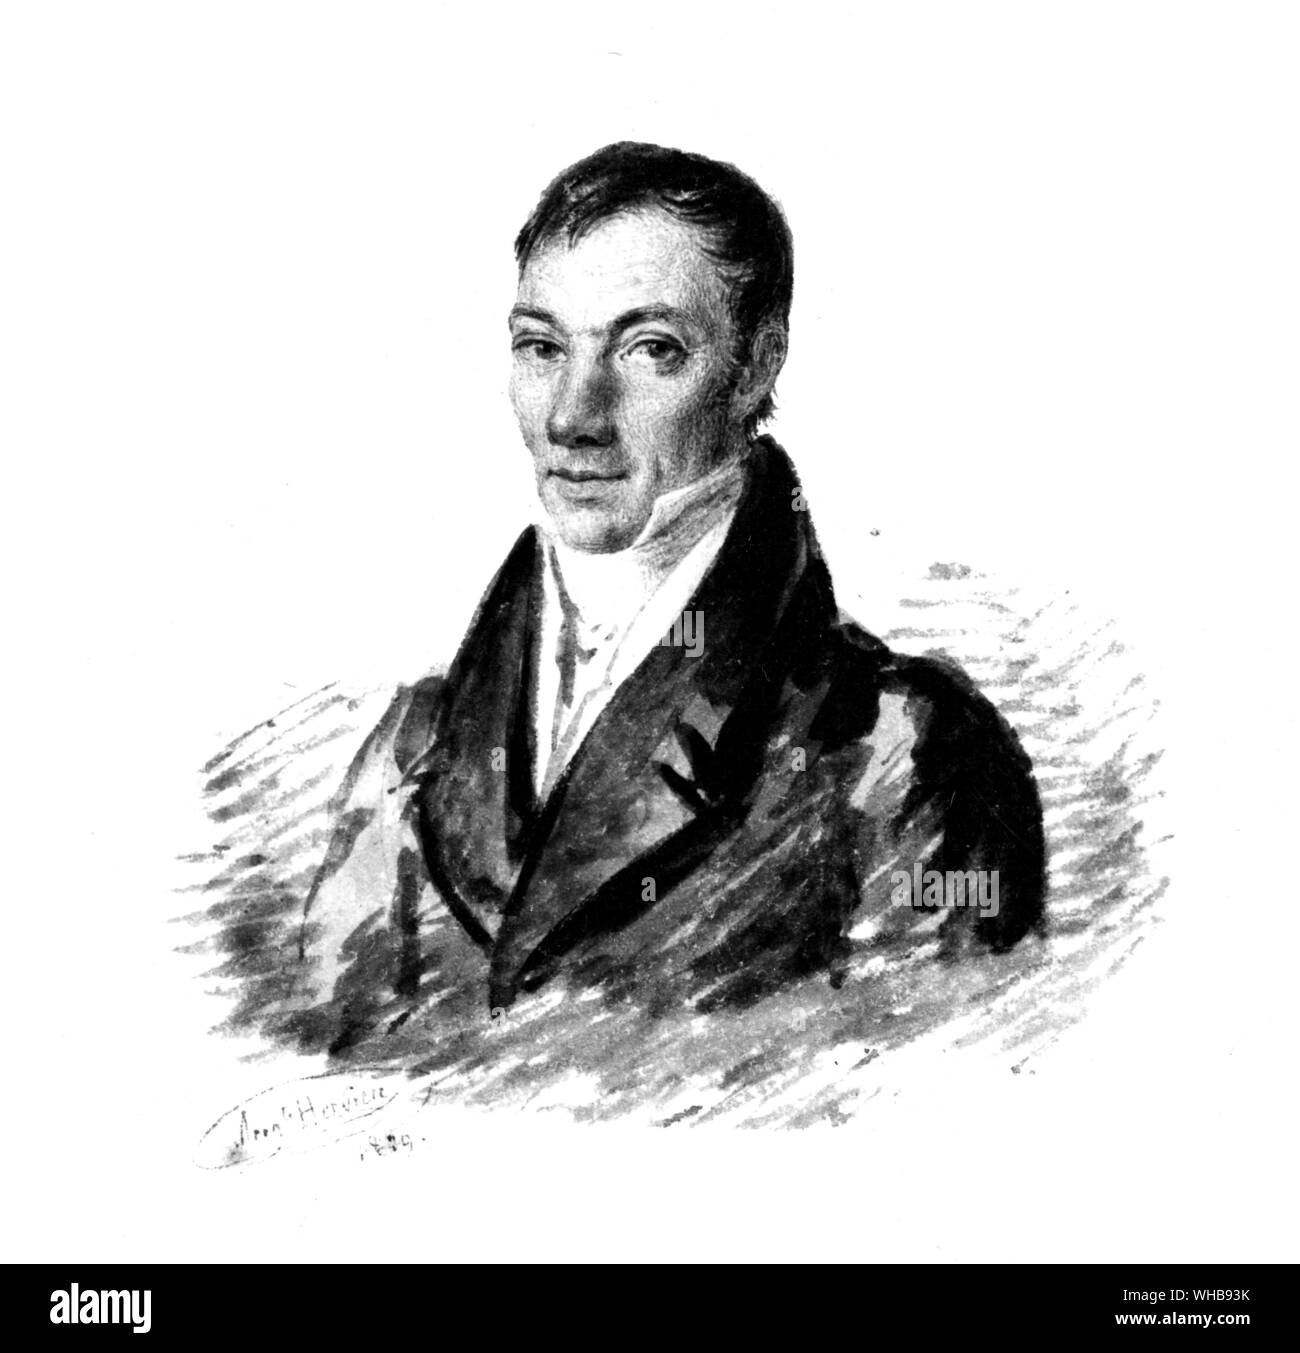 Robert Owen 20 May 1829. Robert Owen (1771-1858), Welsh social philosopher and reformer. one of the founders of socialism and the cooperative movement . Stock Photo